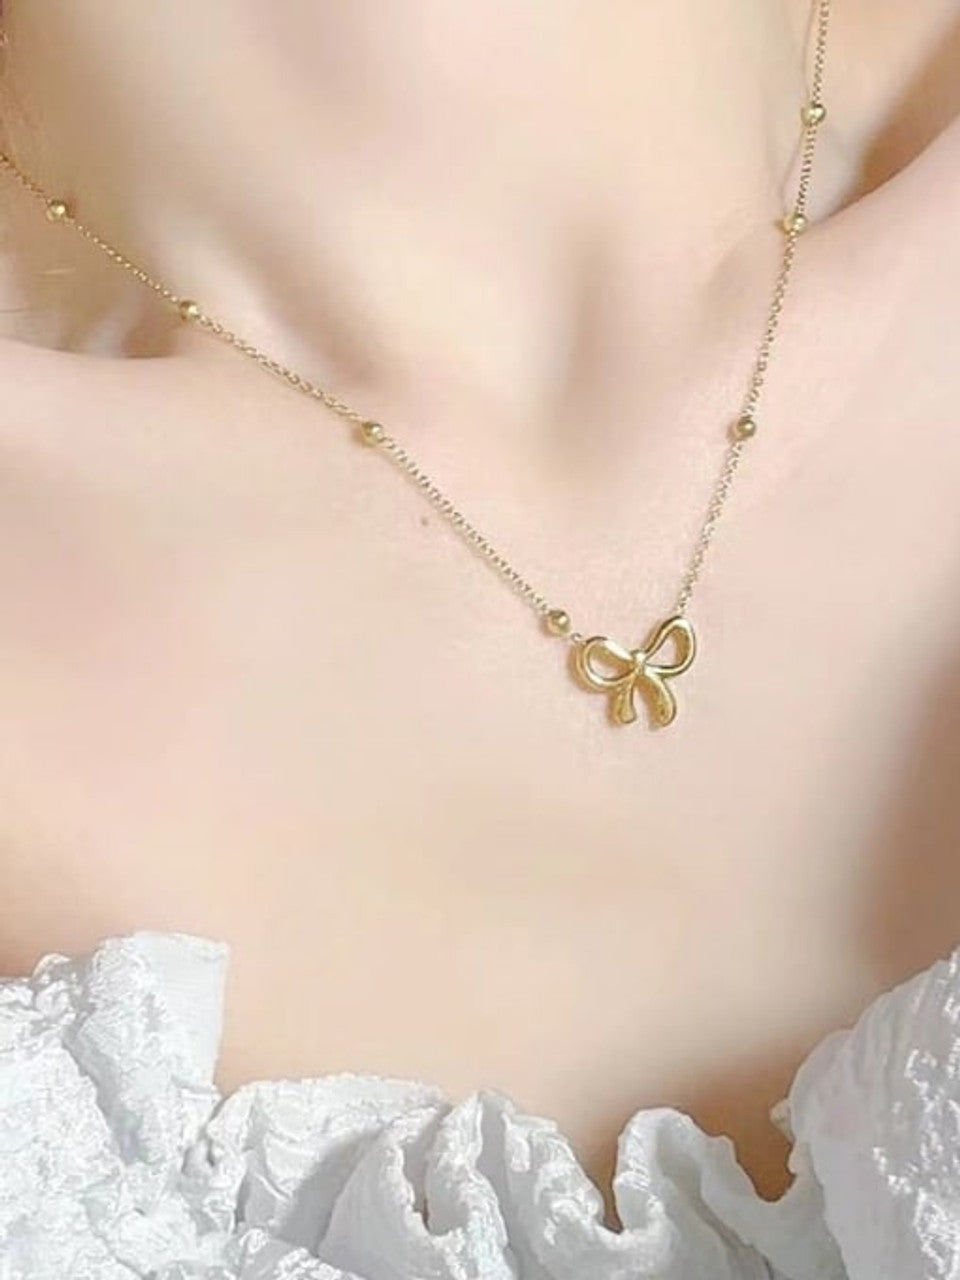 Trendy Bow Necklace